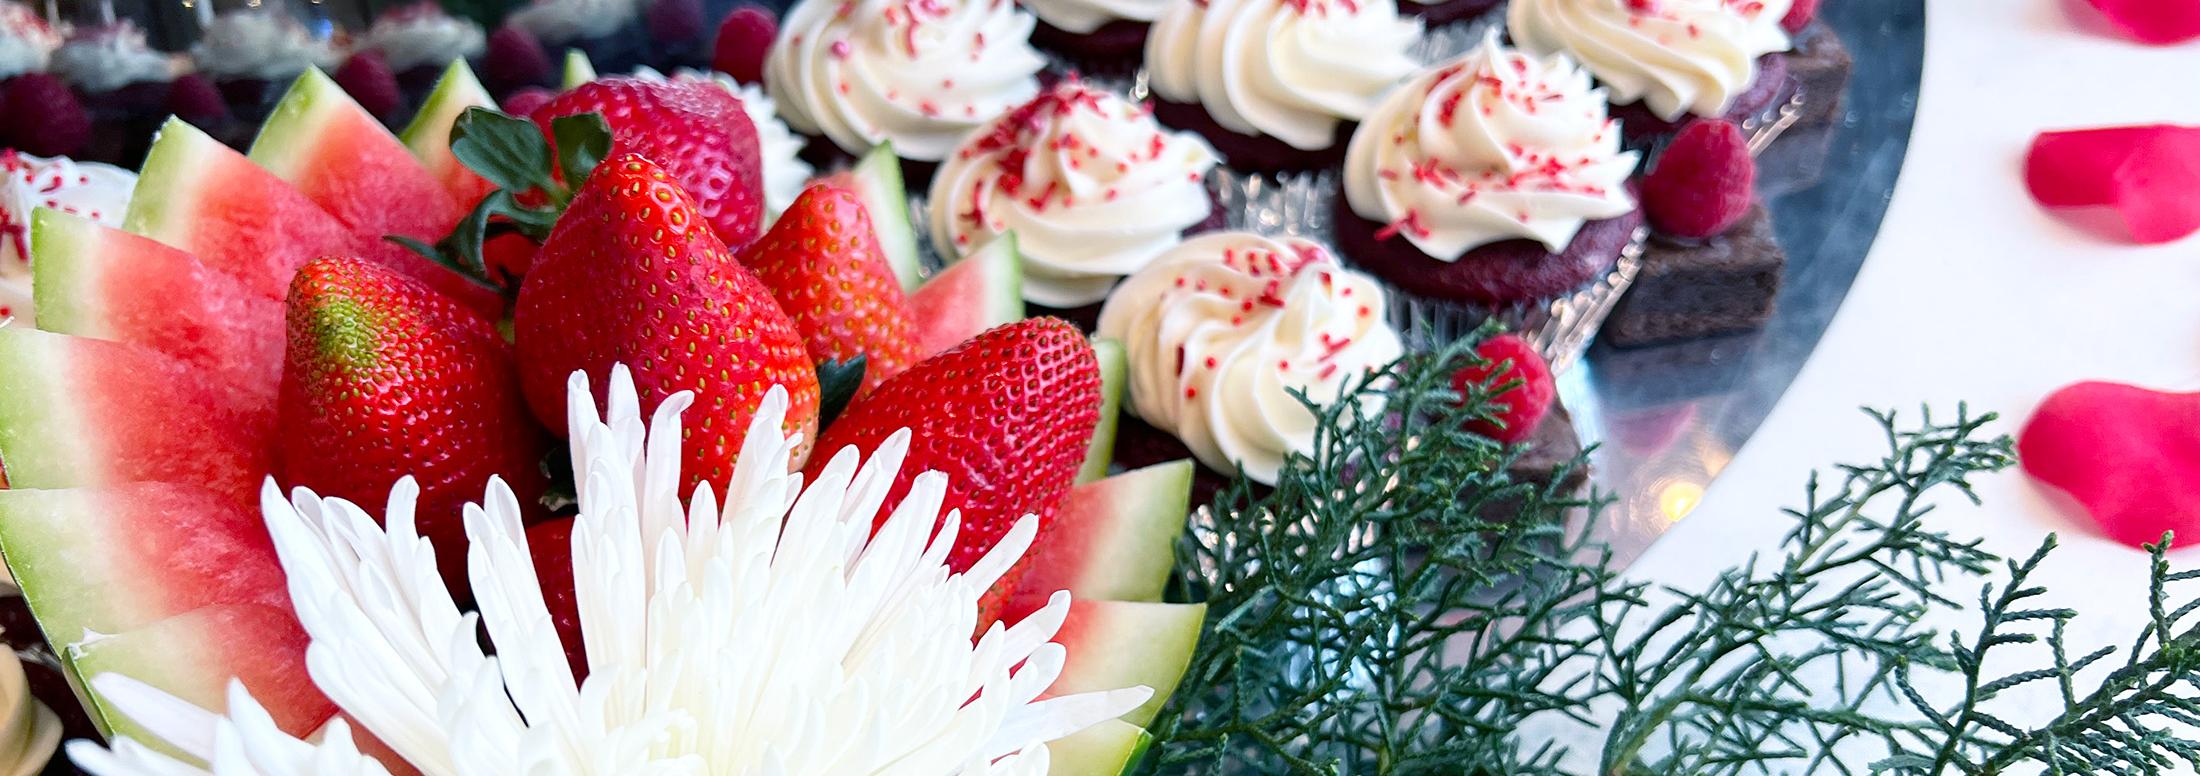 Slices of watermelon and Strawberries arranged to look like a flower with rows of cupcakes visible behind them and pink flower petals decorating the table.